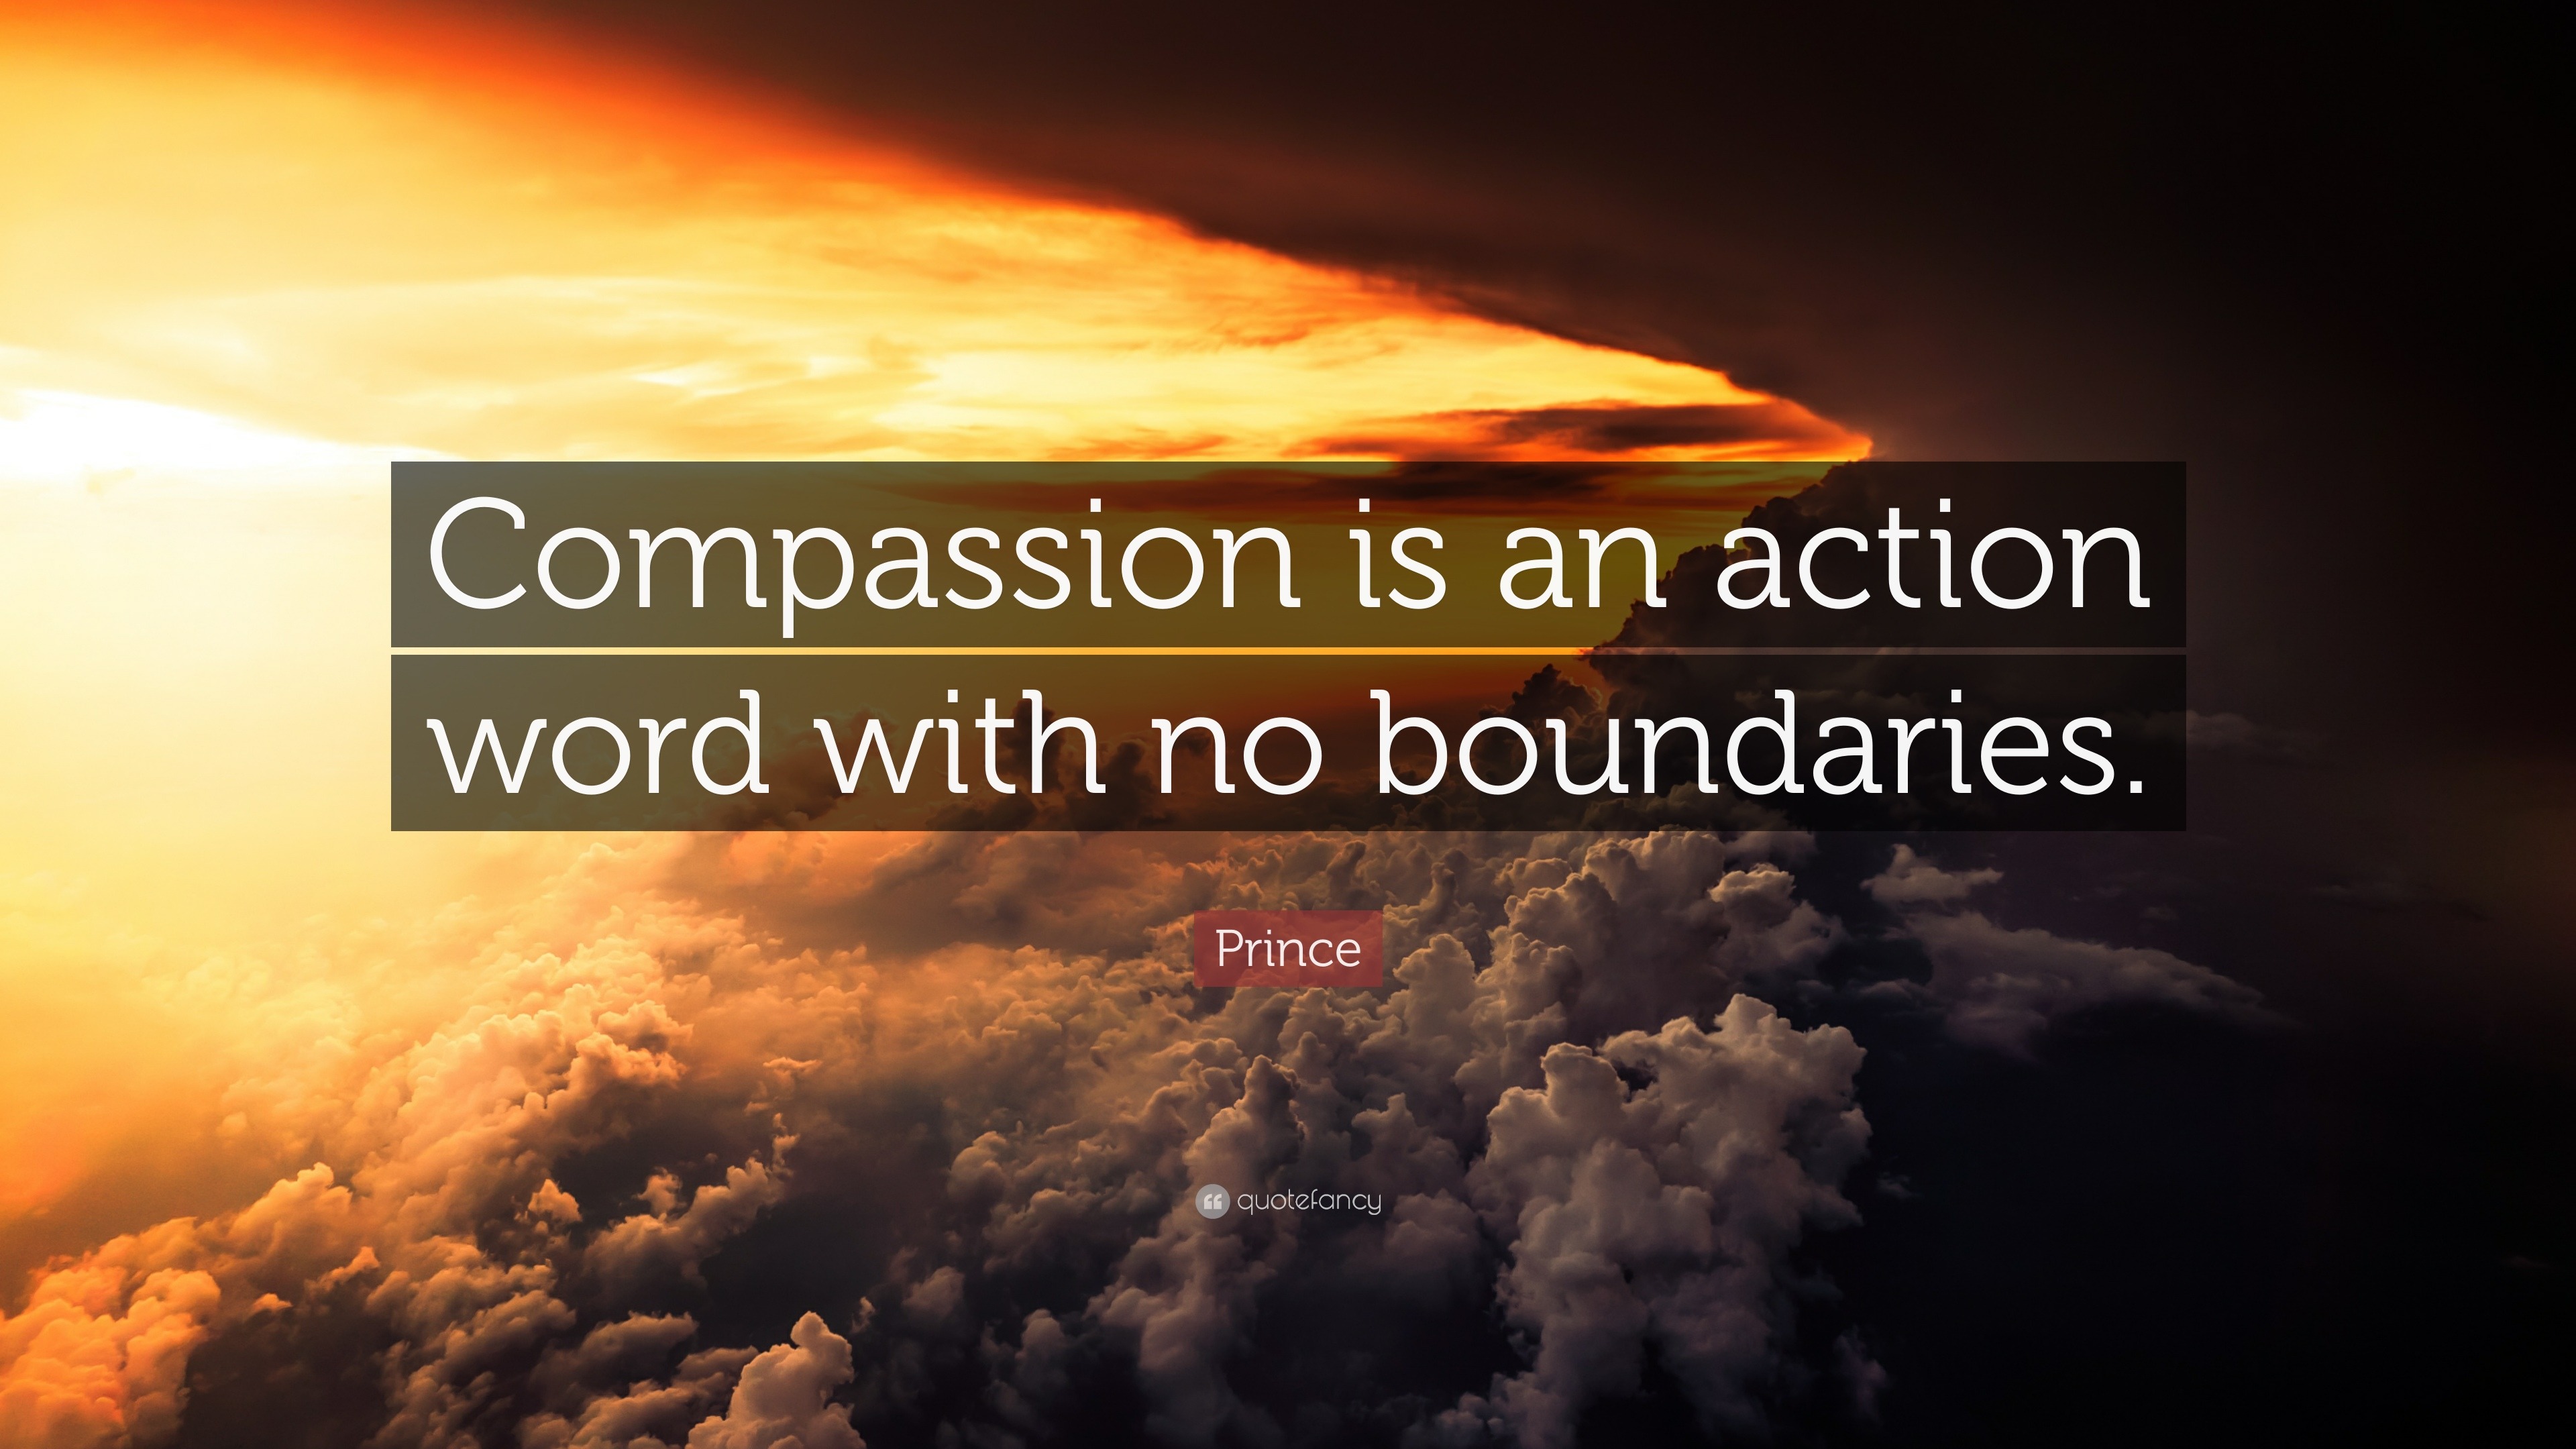 Compassion is an action word with no